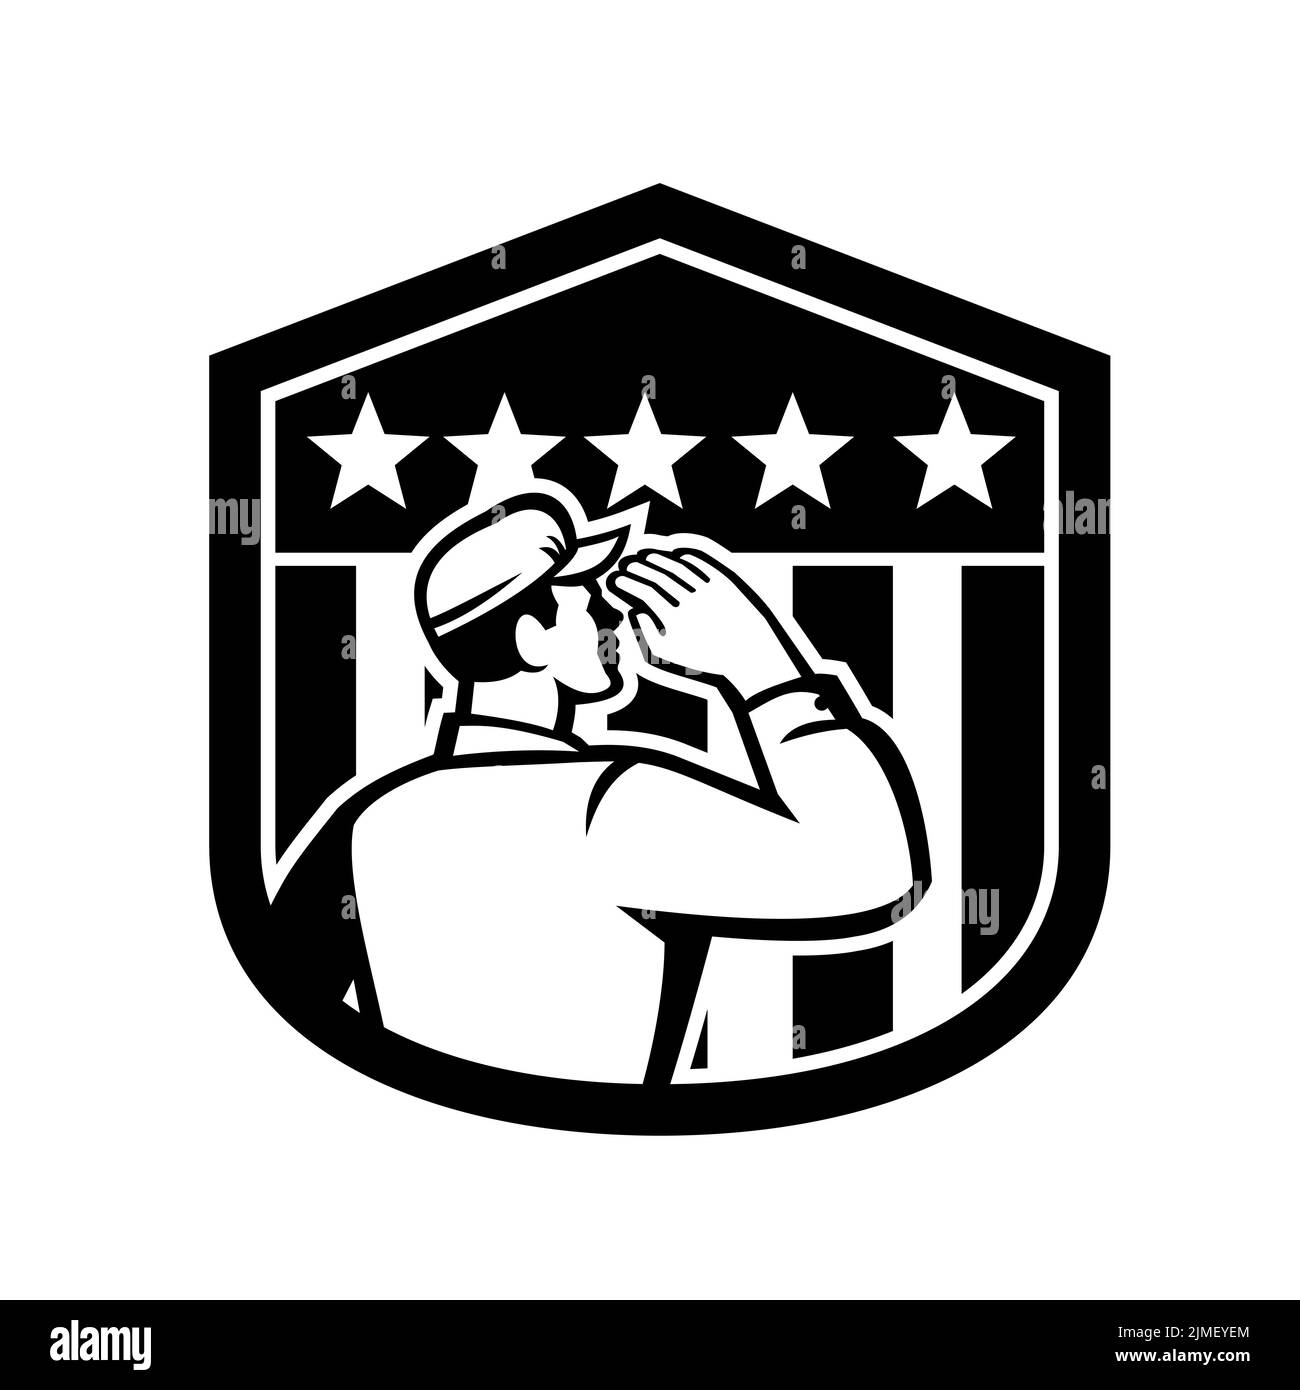 American Soldier Salute USA Flag Badge Retro Black and White Stock Photo